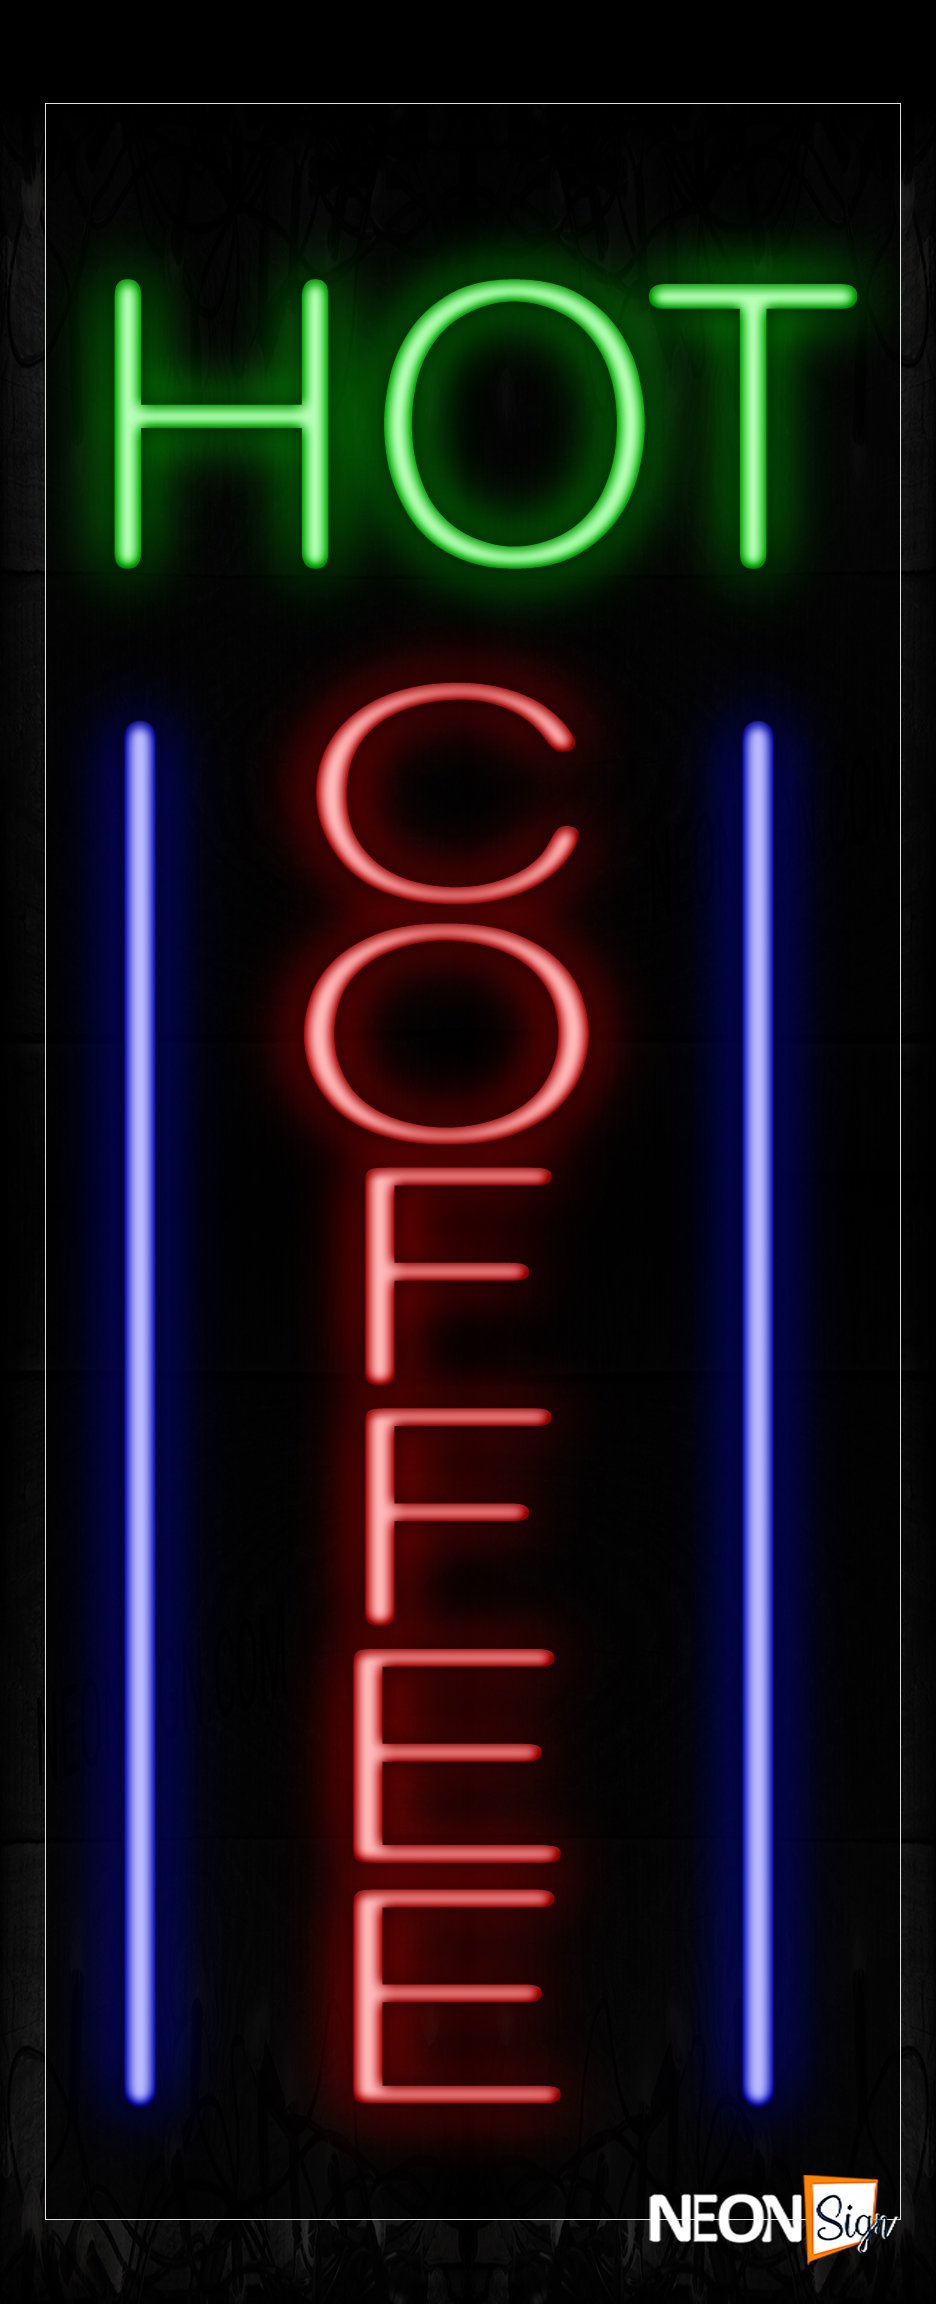 Image of 11571 Hot Coffee With Blue Lines (Vertical) Neon Signs_13x32 Black Backing